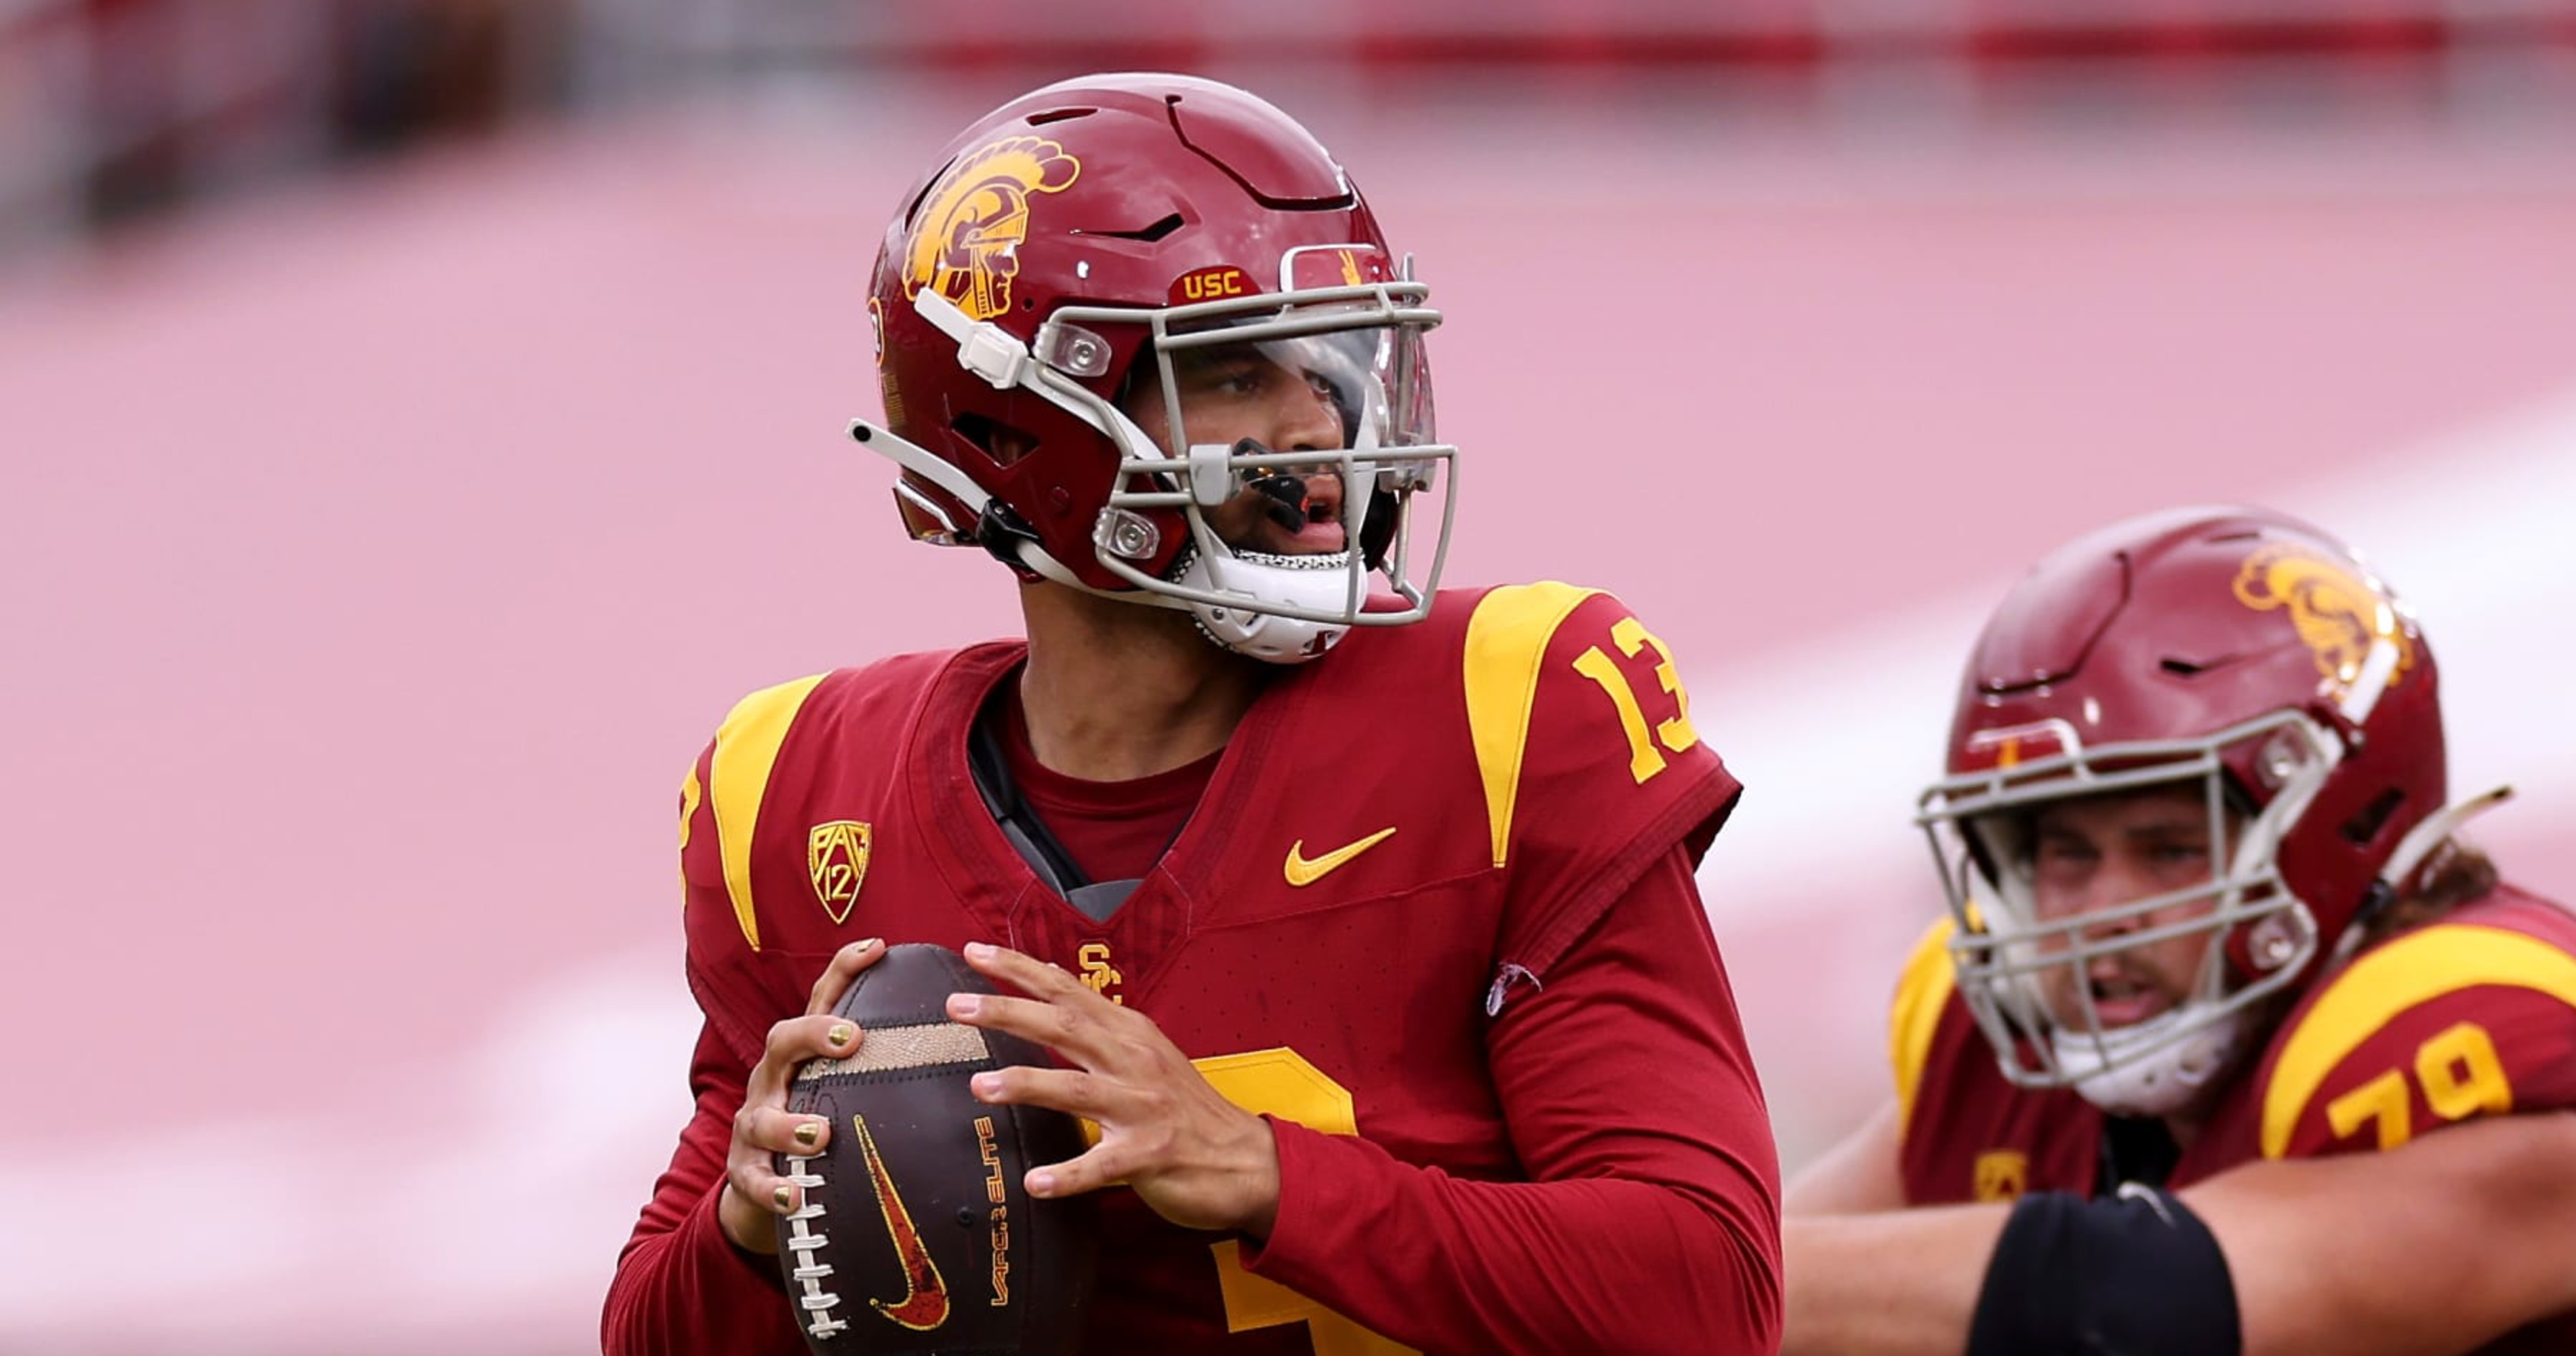 College football: Week 2 rankings see three Group of Five QBs on rise